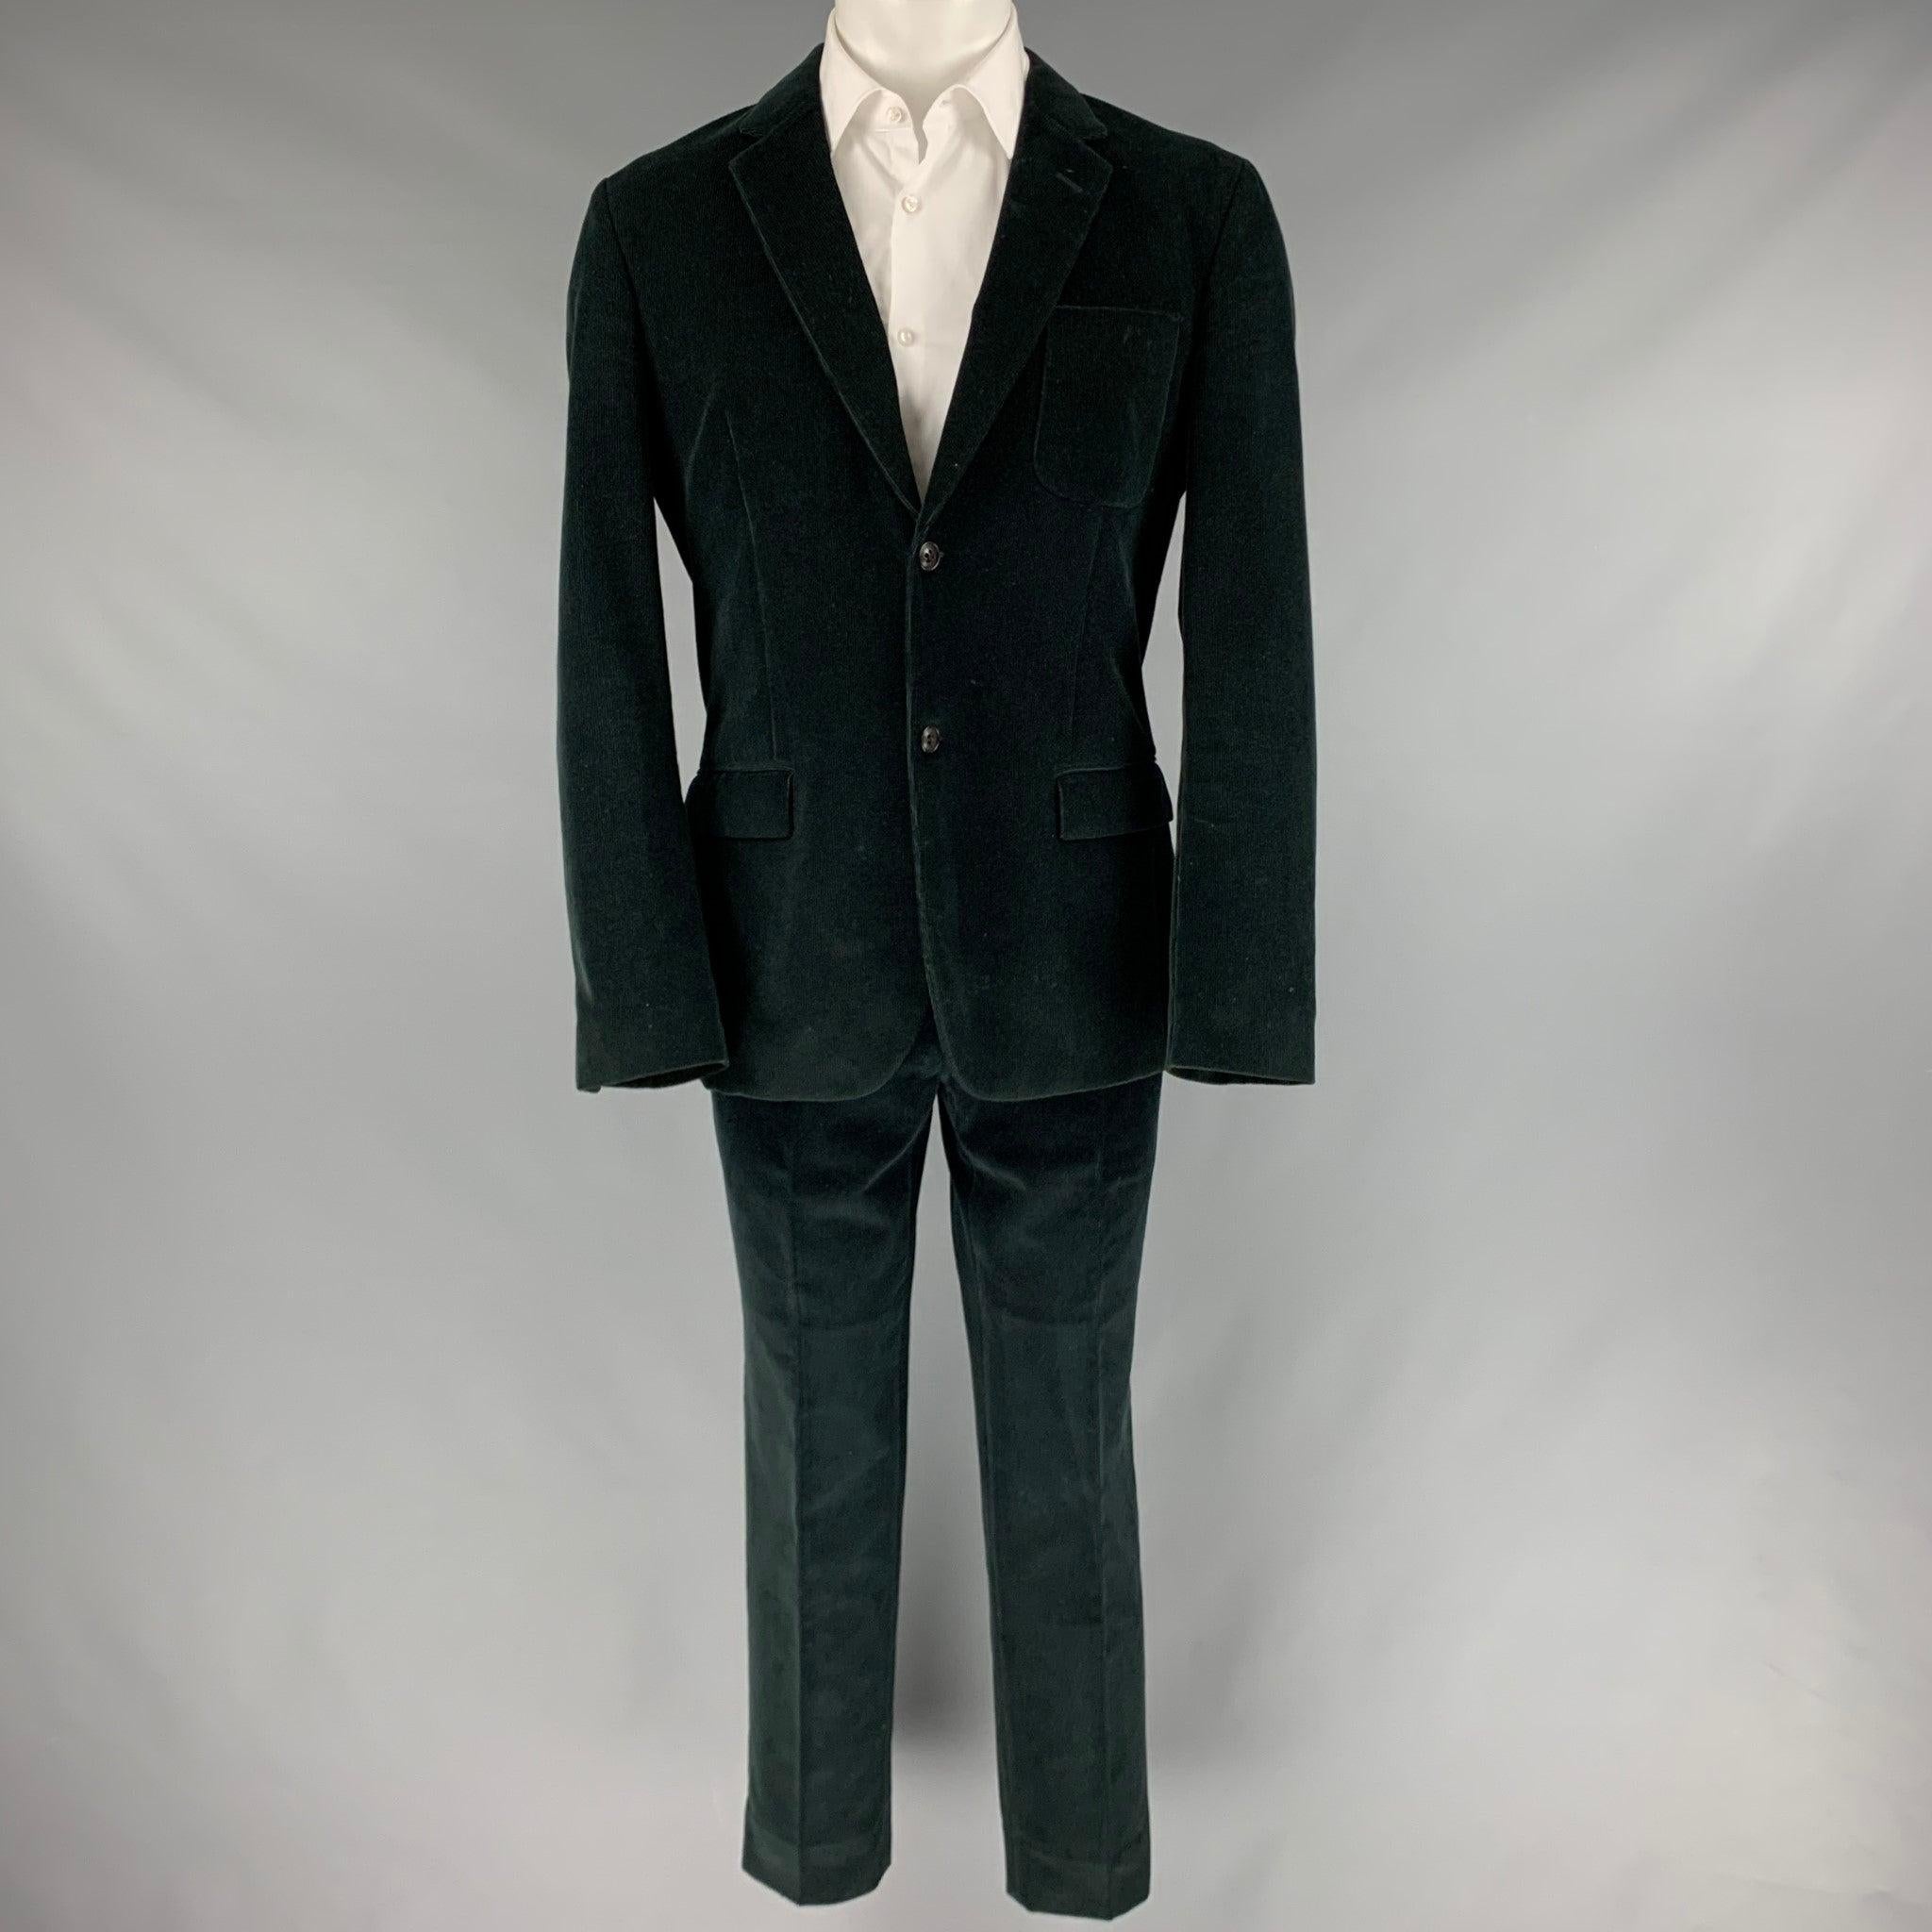 MARC JACOBS suit in a black corduroy cotton with a full liner and includes a single breasted, double button sport coat with notch lapel and matching flat front trousers. Made in Italy. Note: this item may appear to be green in different lighting